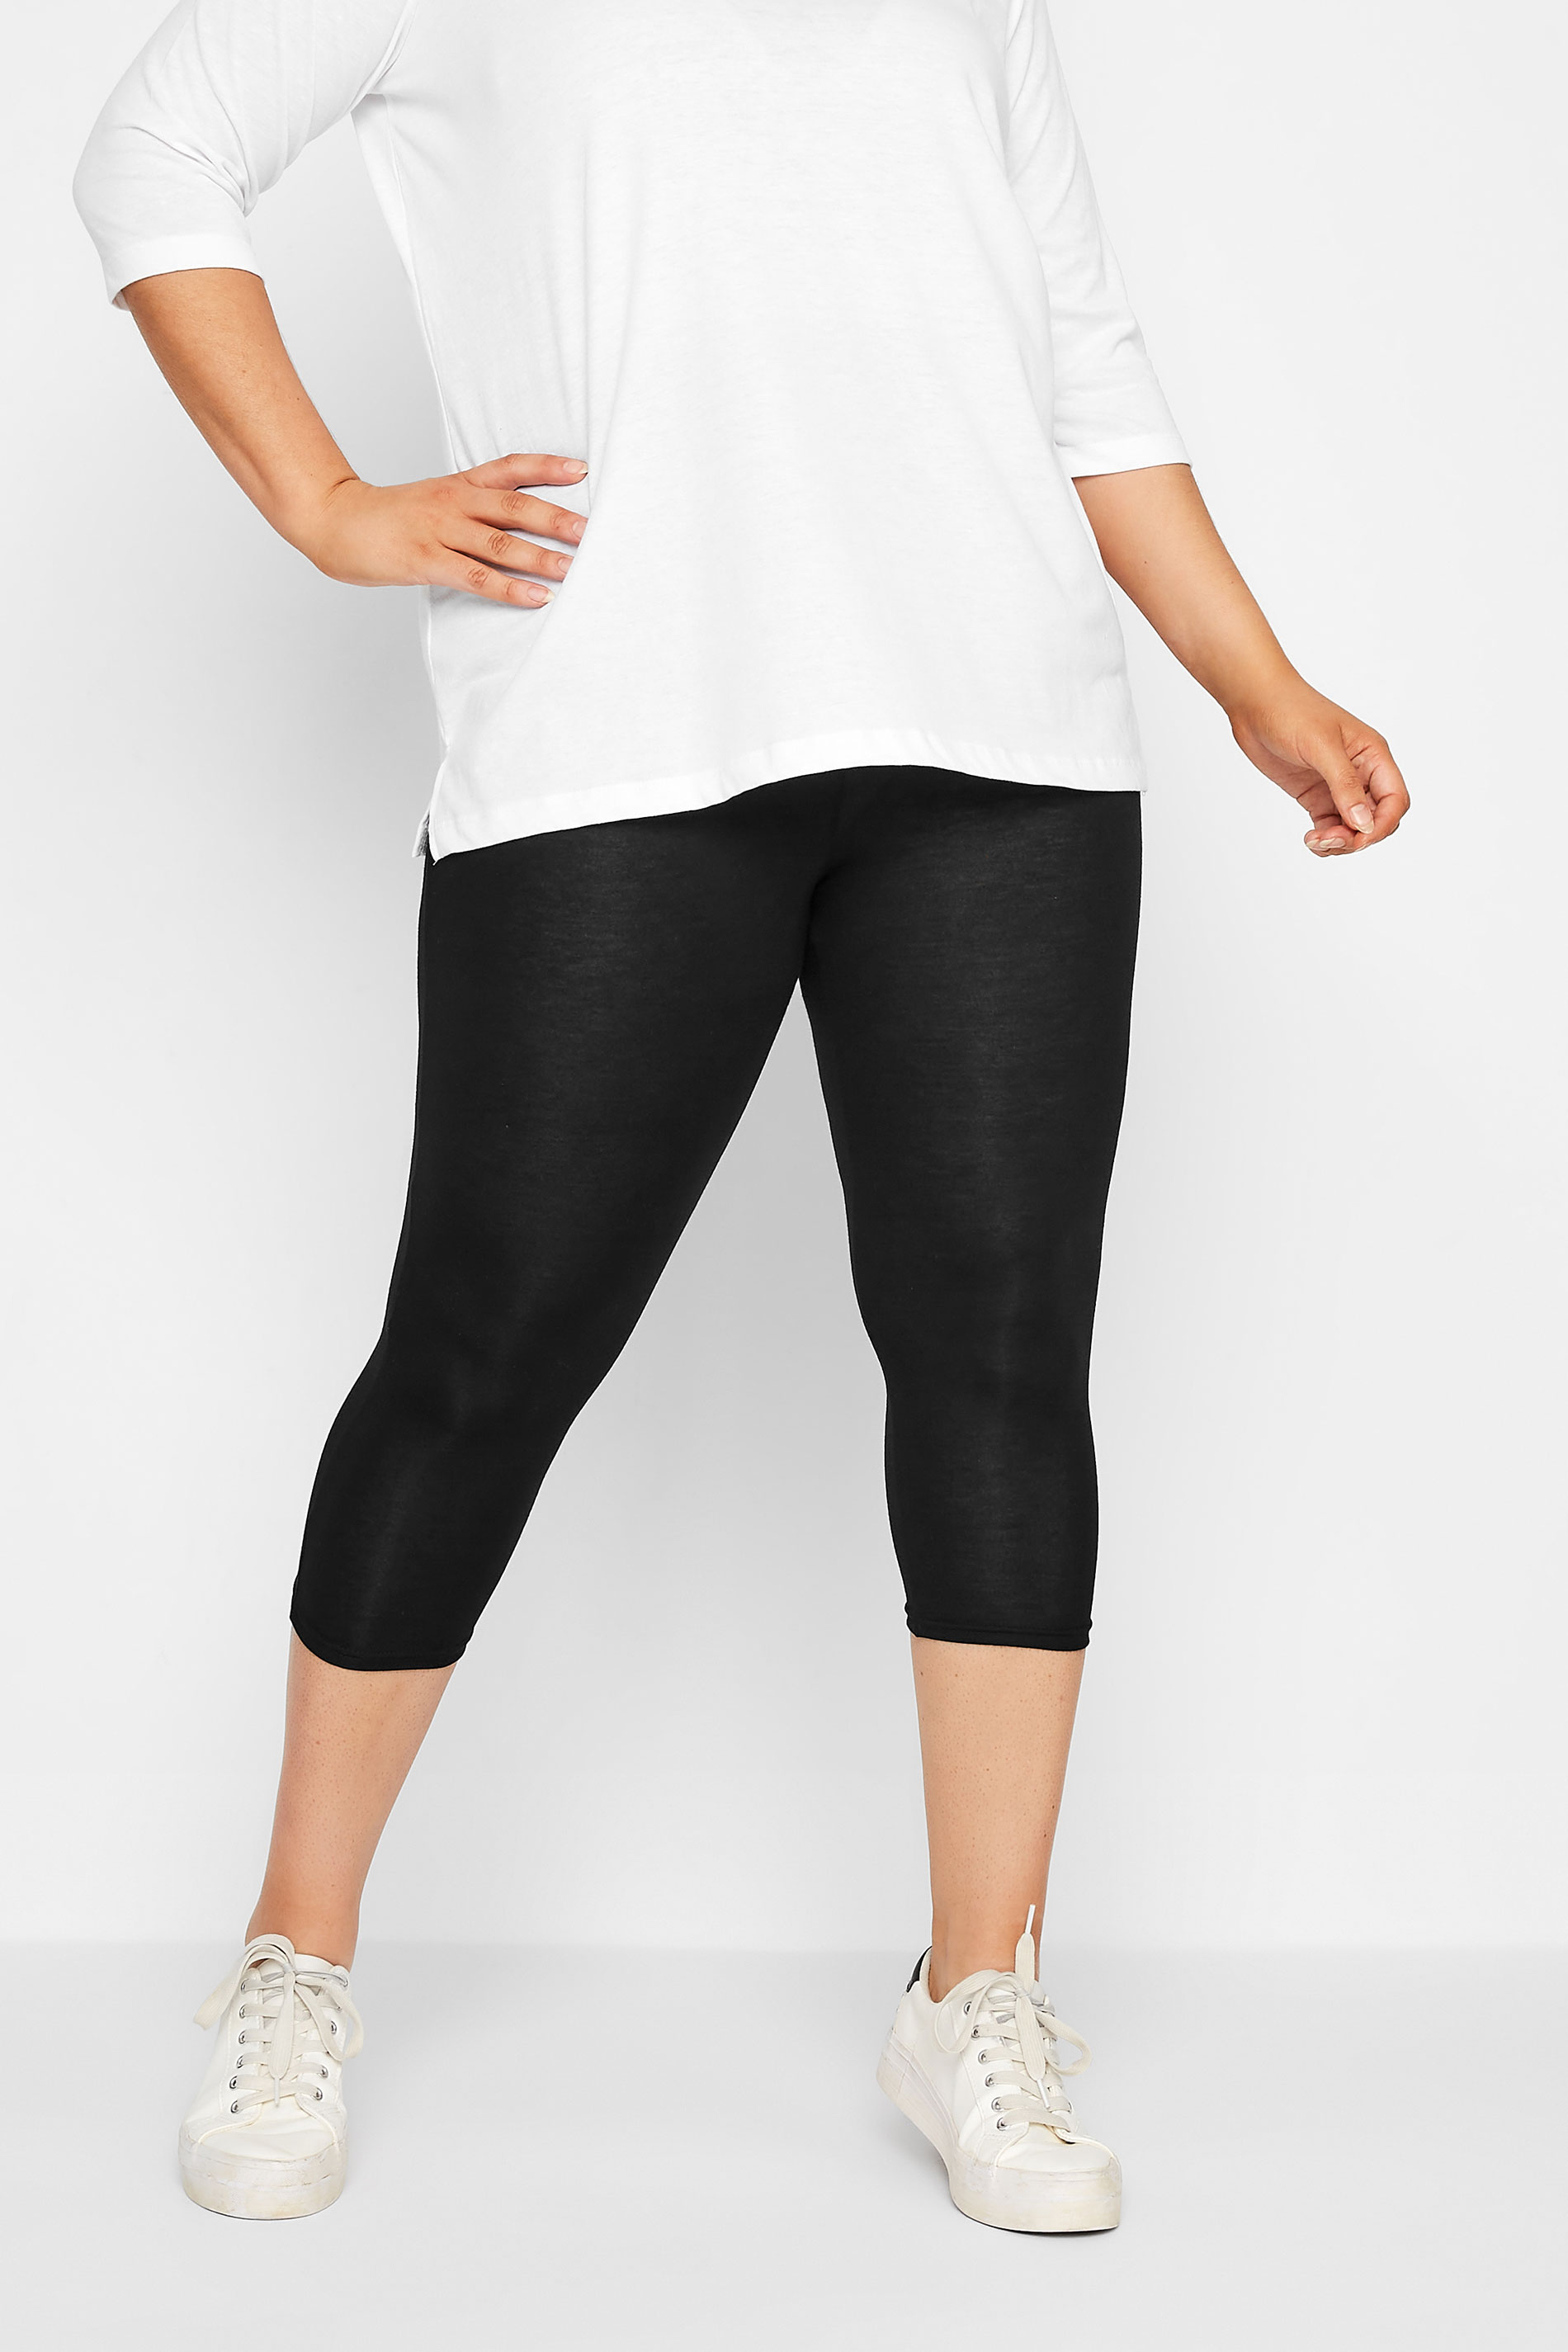 Plus Size Black Cropped Leggings | Yours Clothing 1